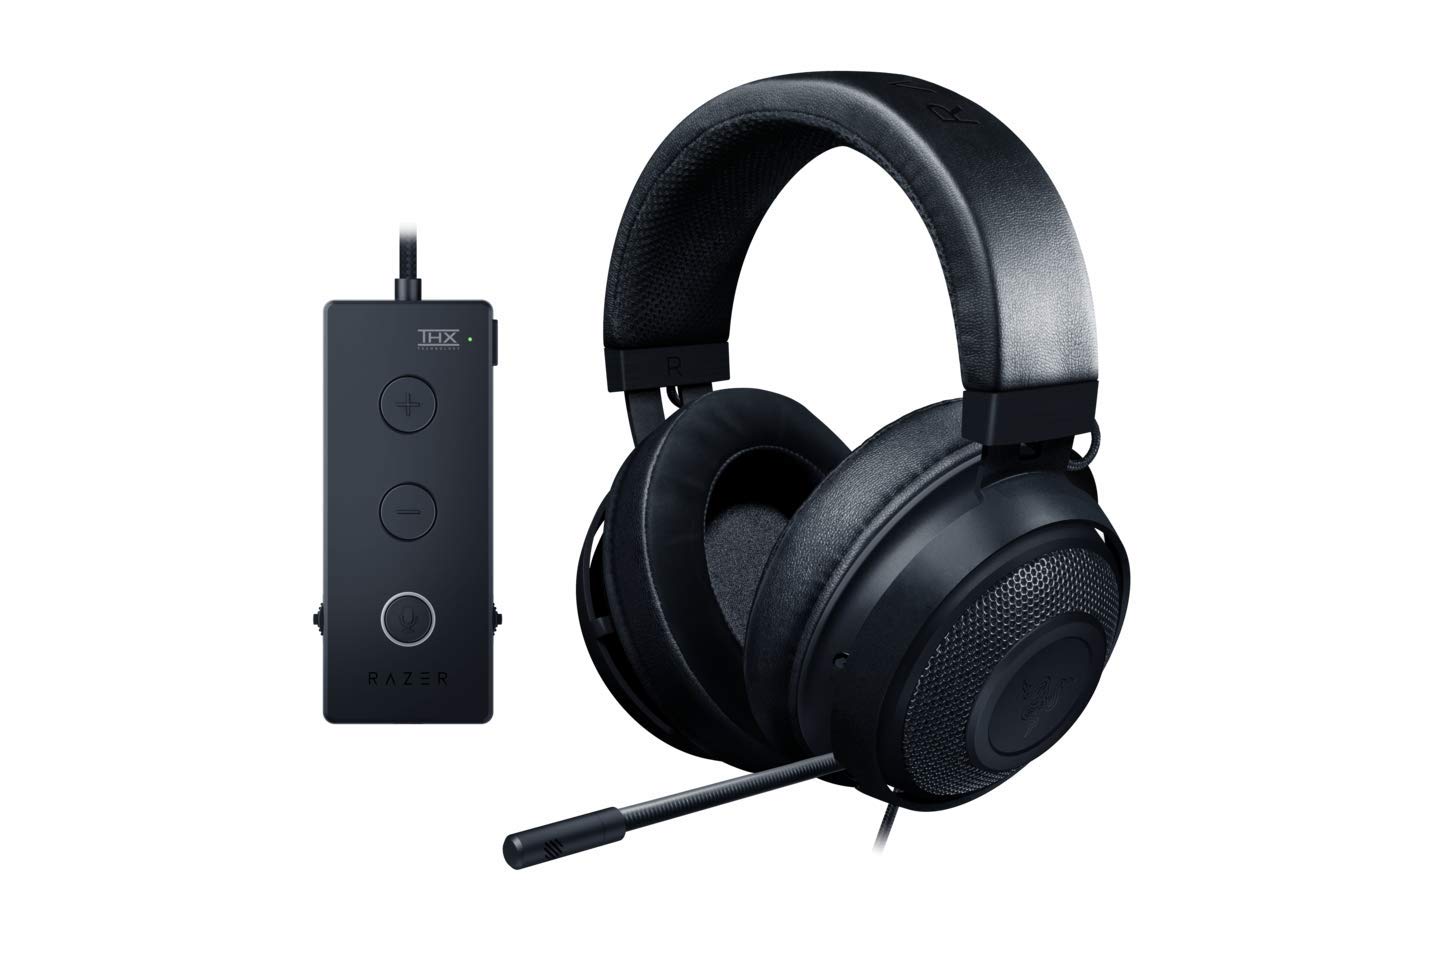 Kraken Tournament Edition: THX Spatial Audio - Full Audio Control - Cooling Gel-Infused Ear Cushions - Gaming Headset Works with PC, PS4, Xbox One, Switch, Mobile Devices - Color Negro. Marca Razer